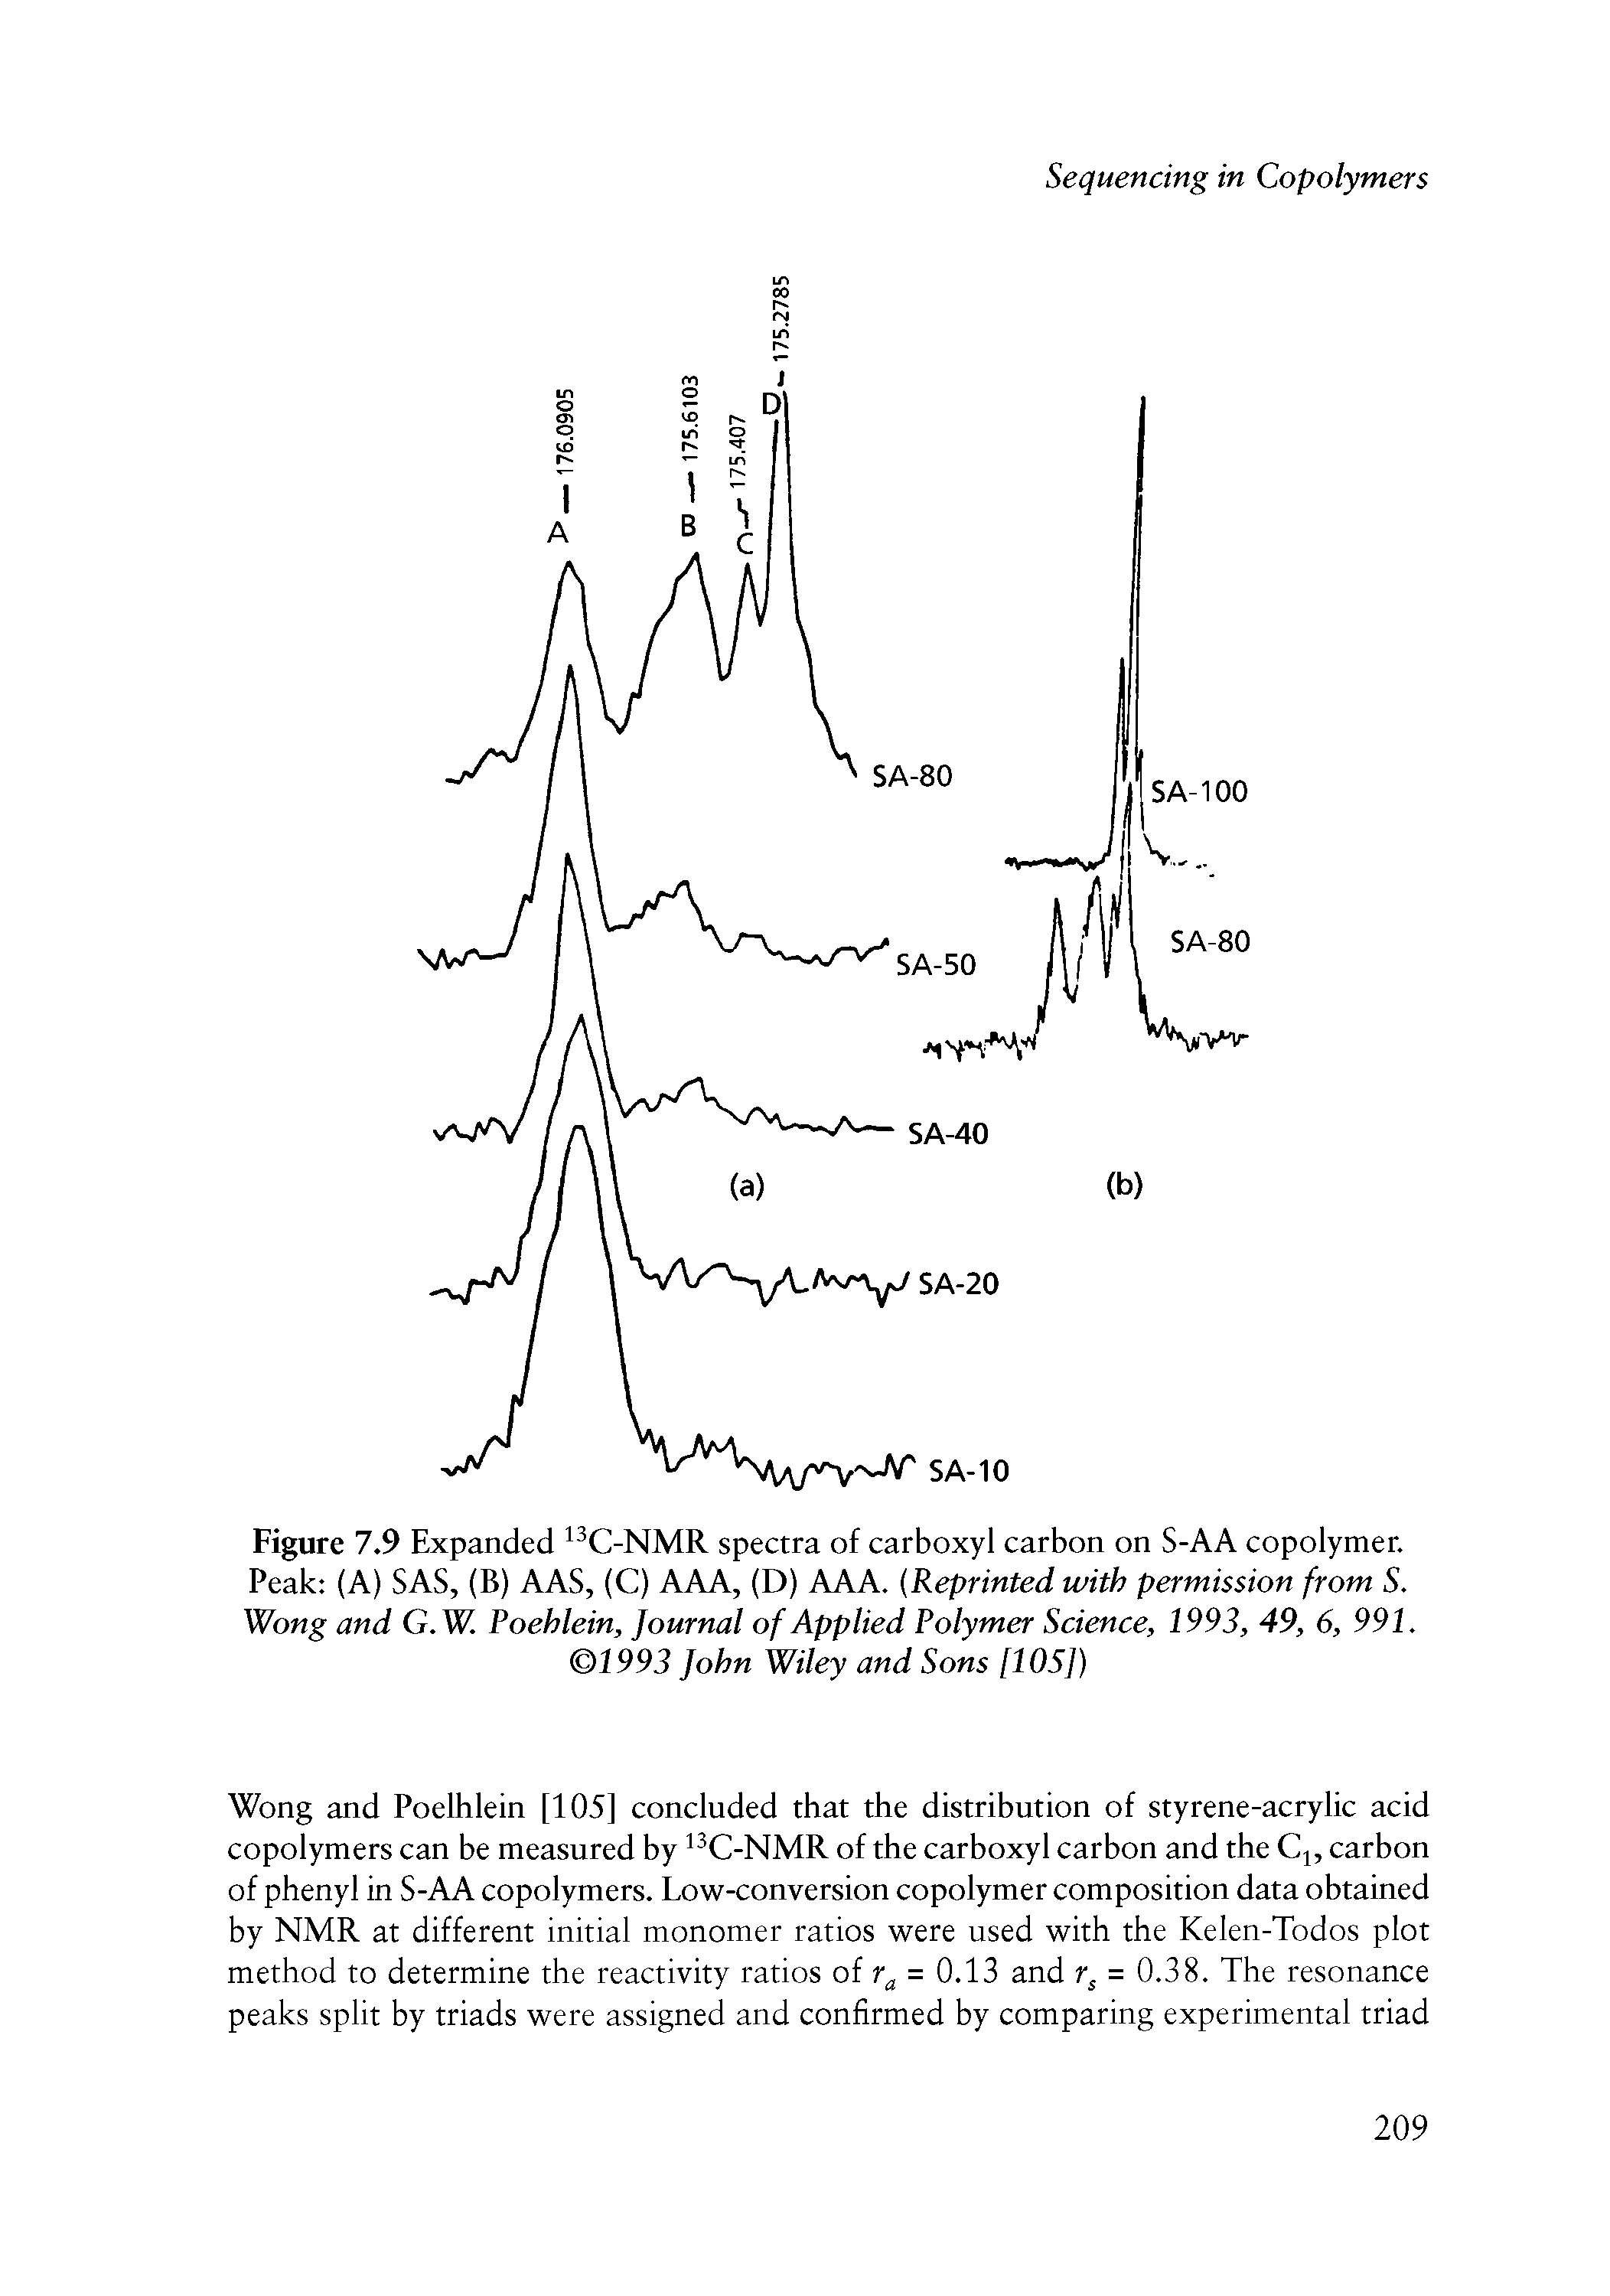 Figure 7.9 Expanded C-NMR spectra of carboxyl carbon on S-AA copolymer. Peak (A) SAS, (B) AAS, (C) AAA, (D) AAA. Reprinted with permission from S. Wong and G.W. Poehlein, Journal of Applied Polymer Science, 1993, 49, 6, 991. 1993 John Wiley and Sons [105])...